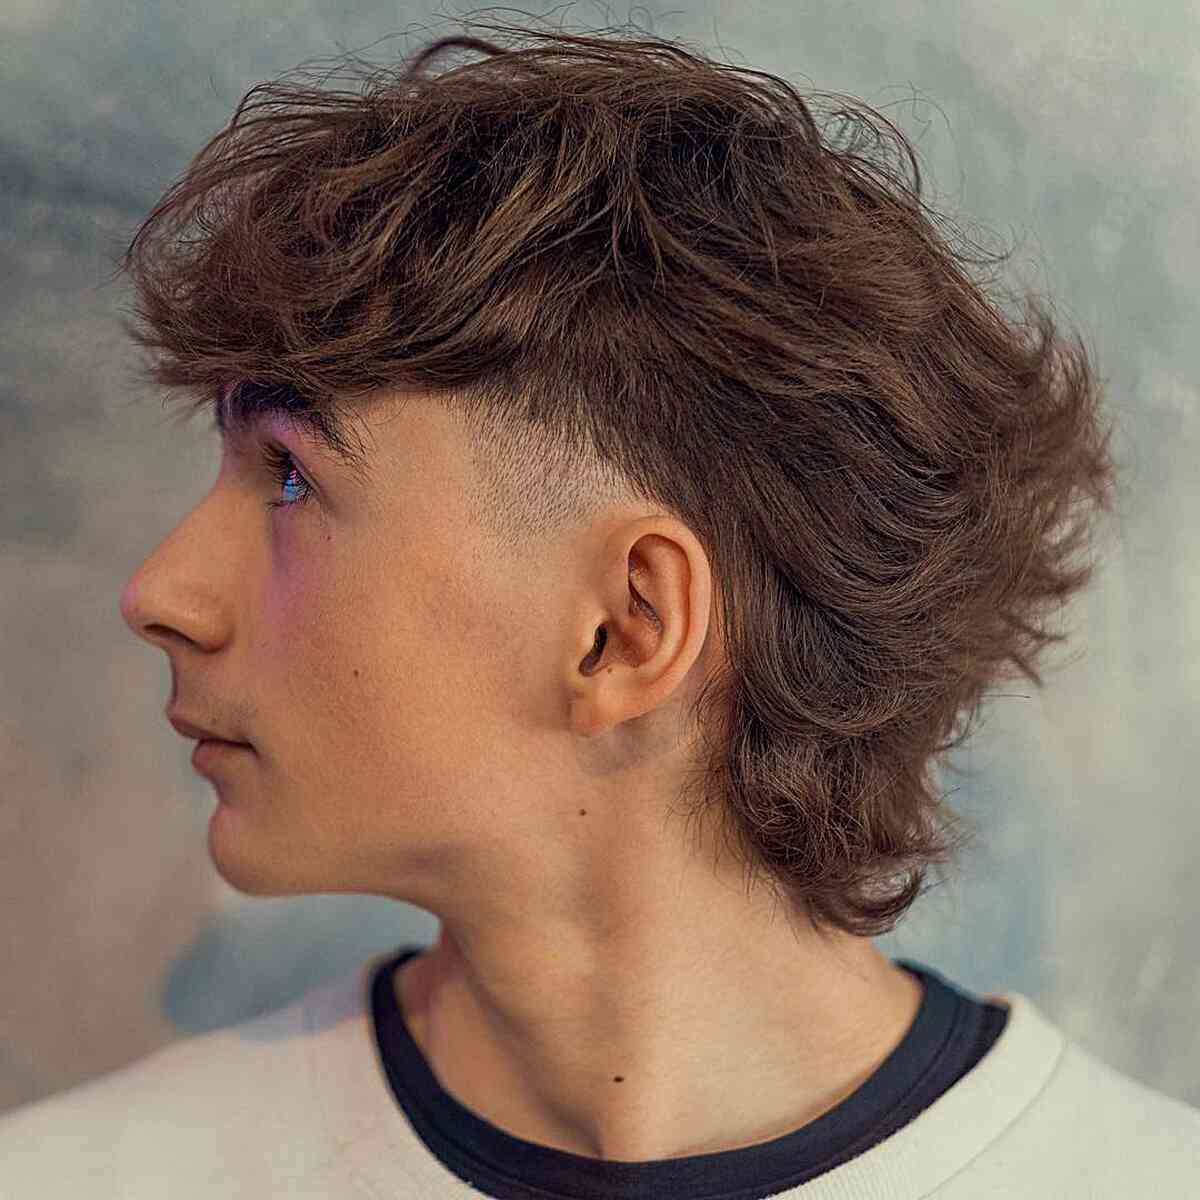 Temp Fade for Mid-Length Hair and men with an edgy style